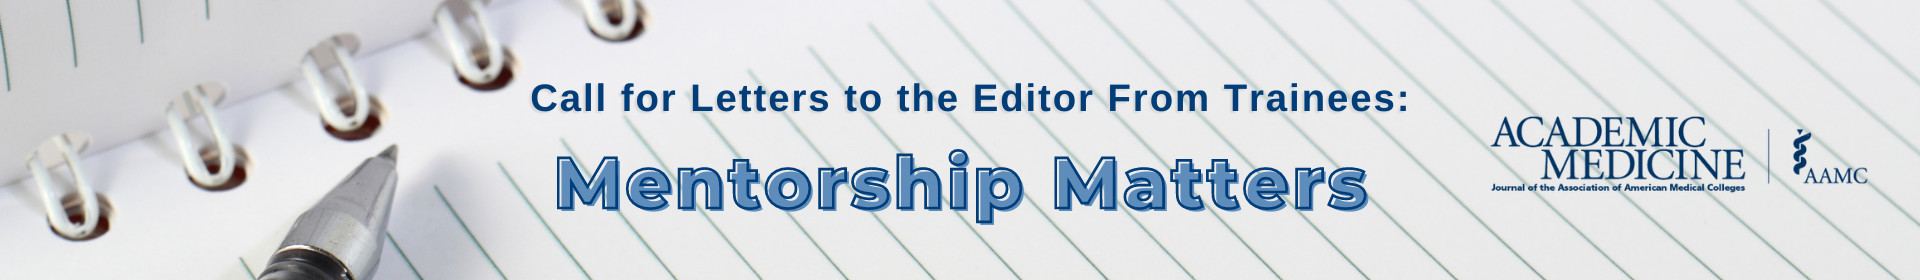 Academic Medicine Call for Letters to the Editor From Trainees: Mentorship Matters